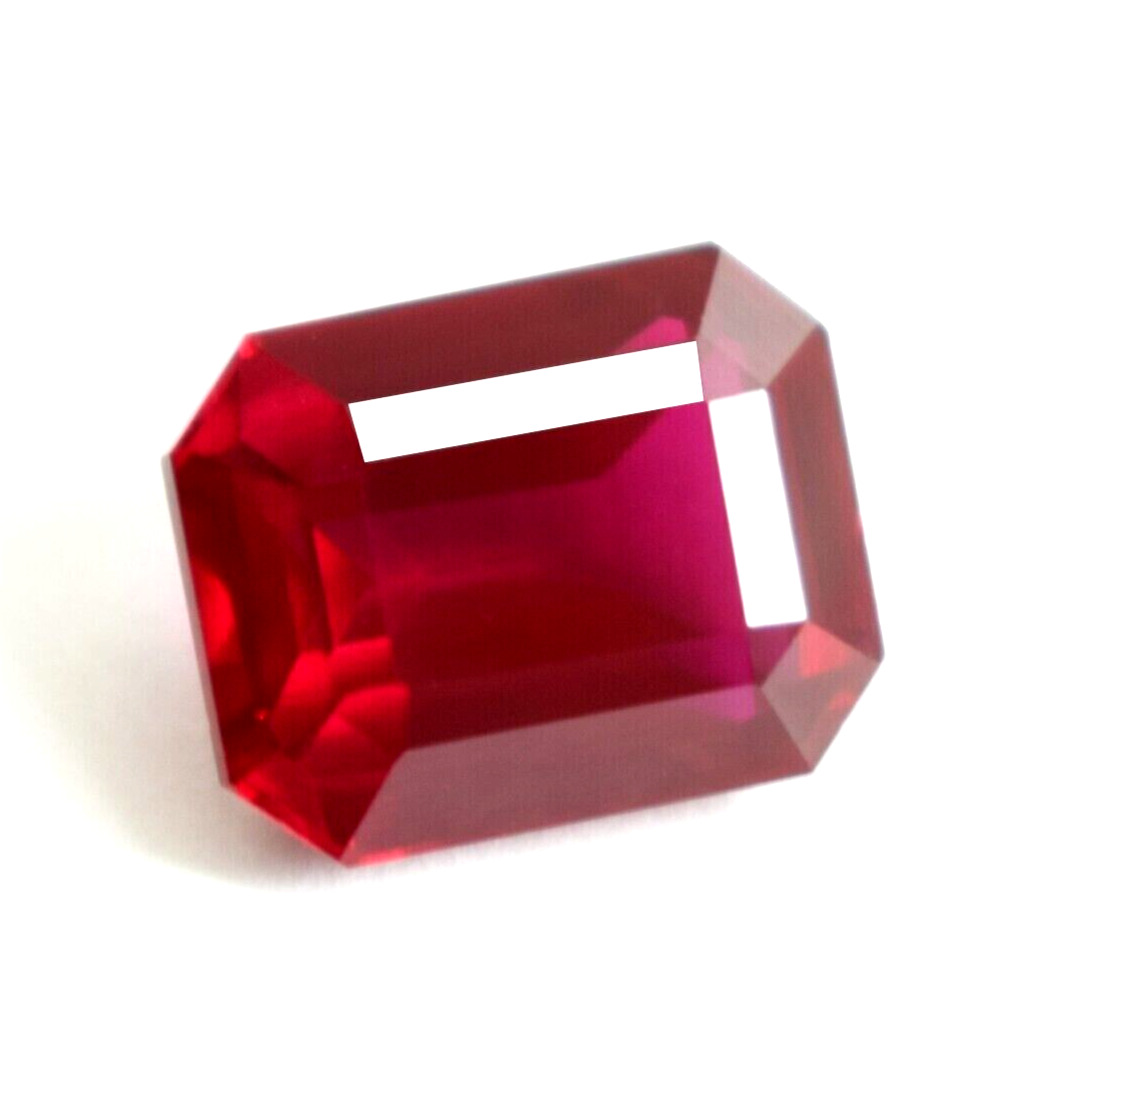 8.50 Ct Ring Size Stone Red Ruby Emerald Cut Natural Loose Gemstone Best Offer